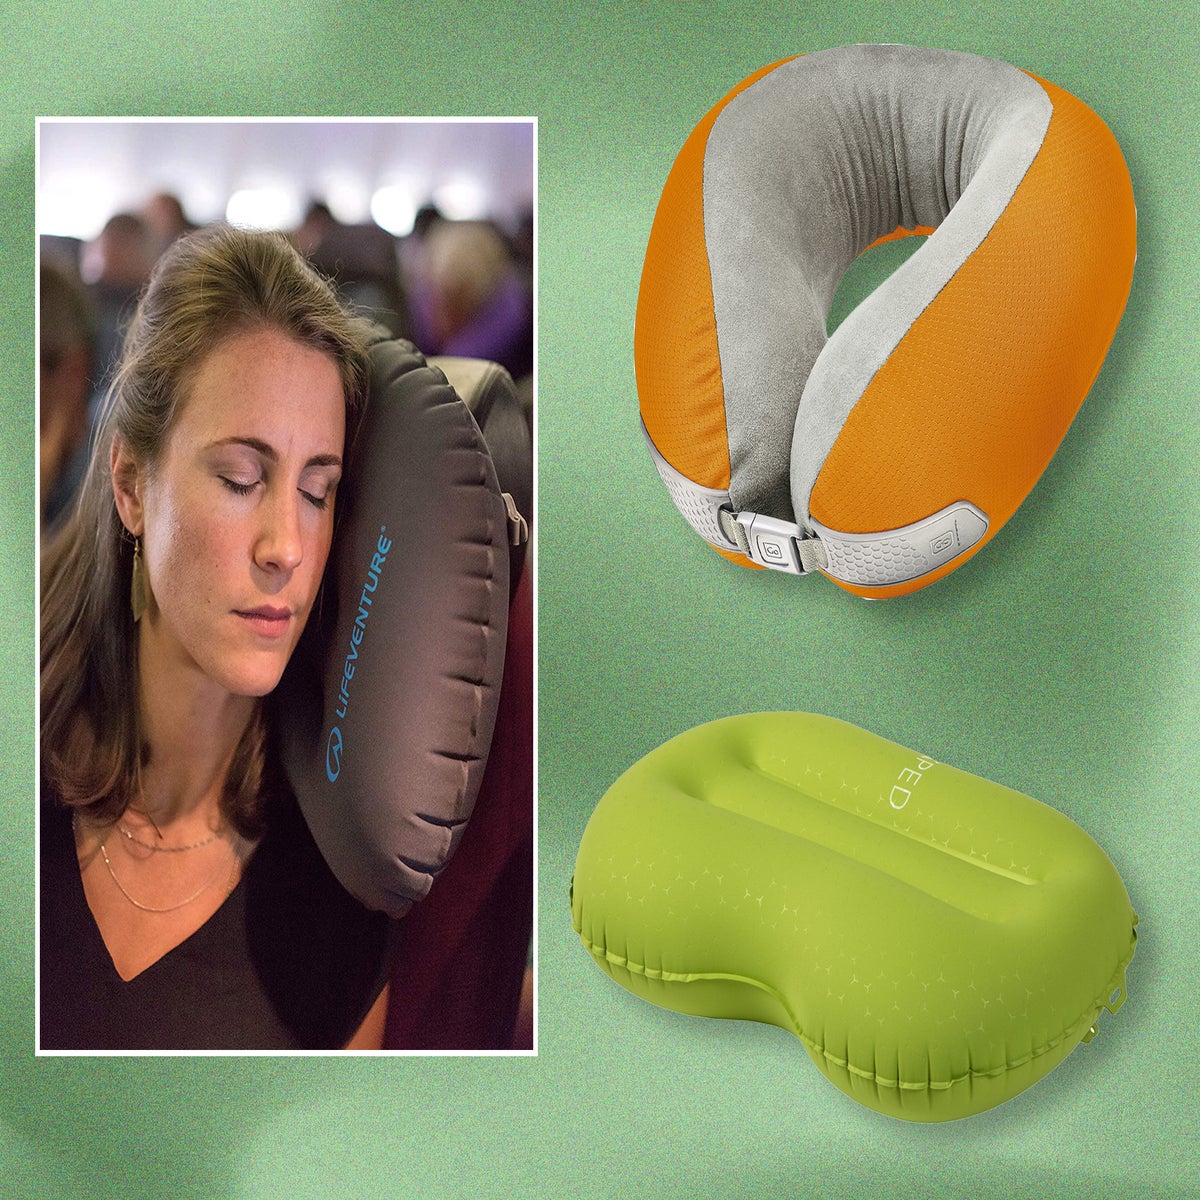 Smarttravel Inflatable Travel Lumbar Pillow for Airplane Portable Lower Back  Pil